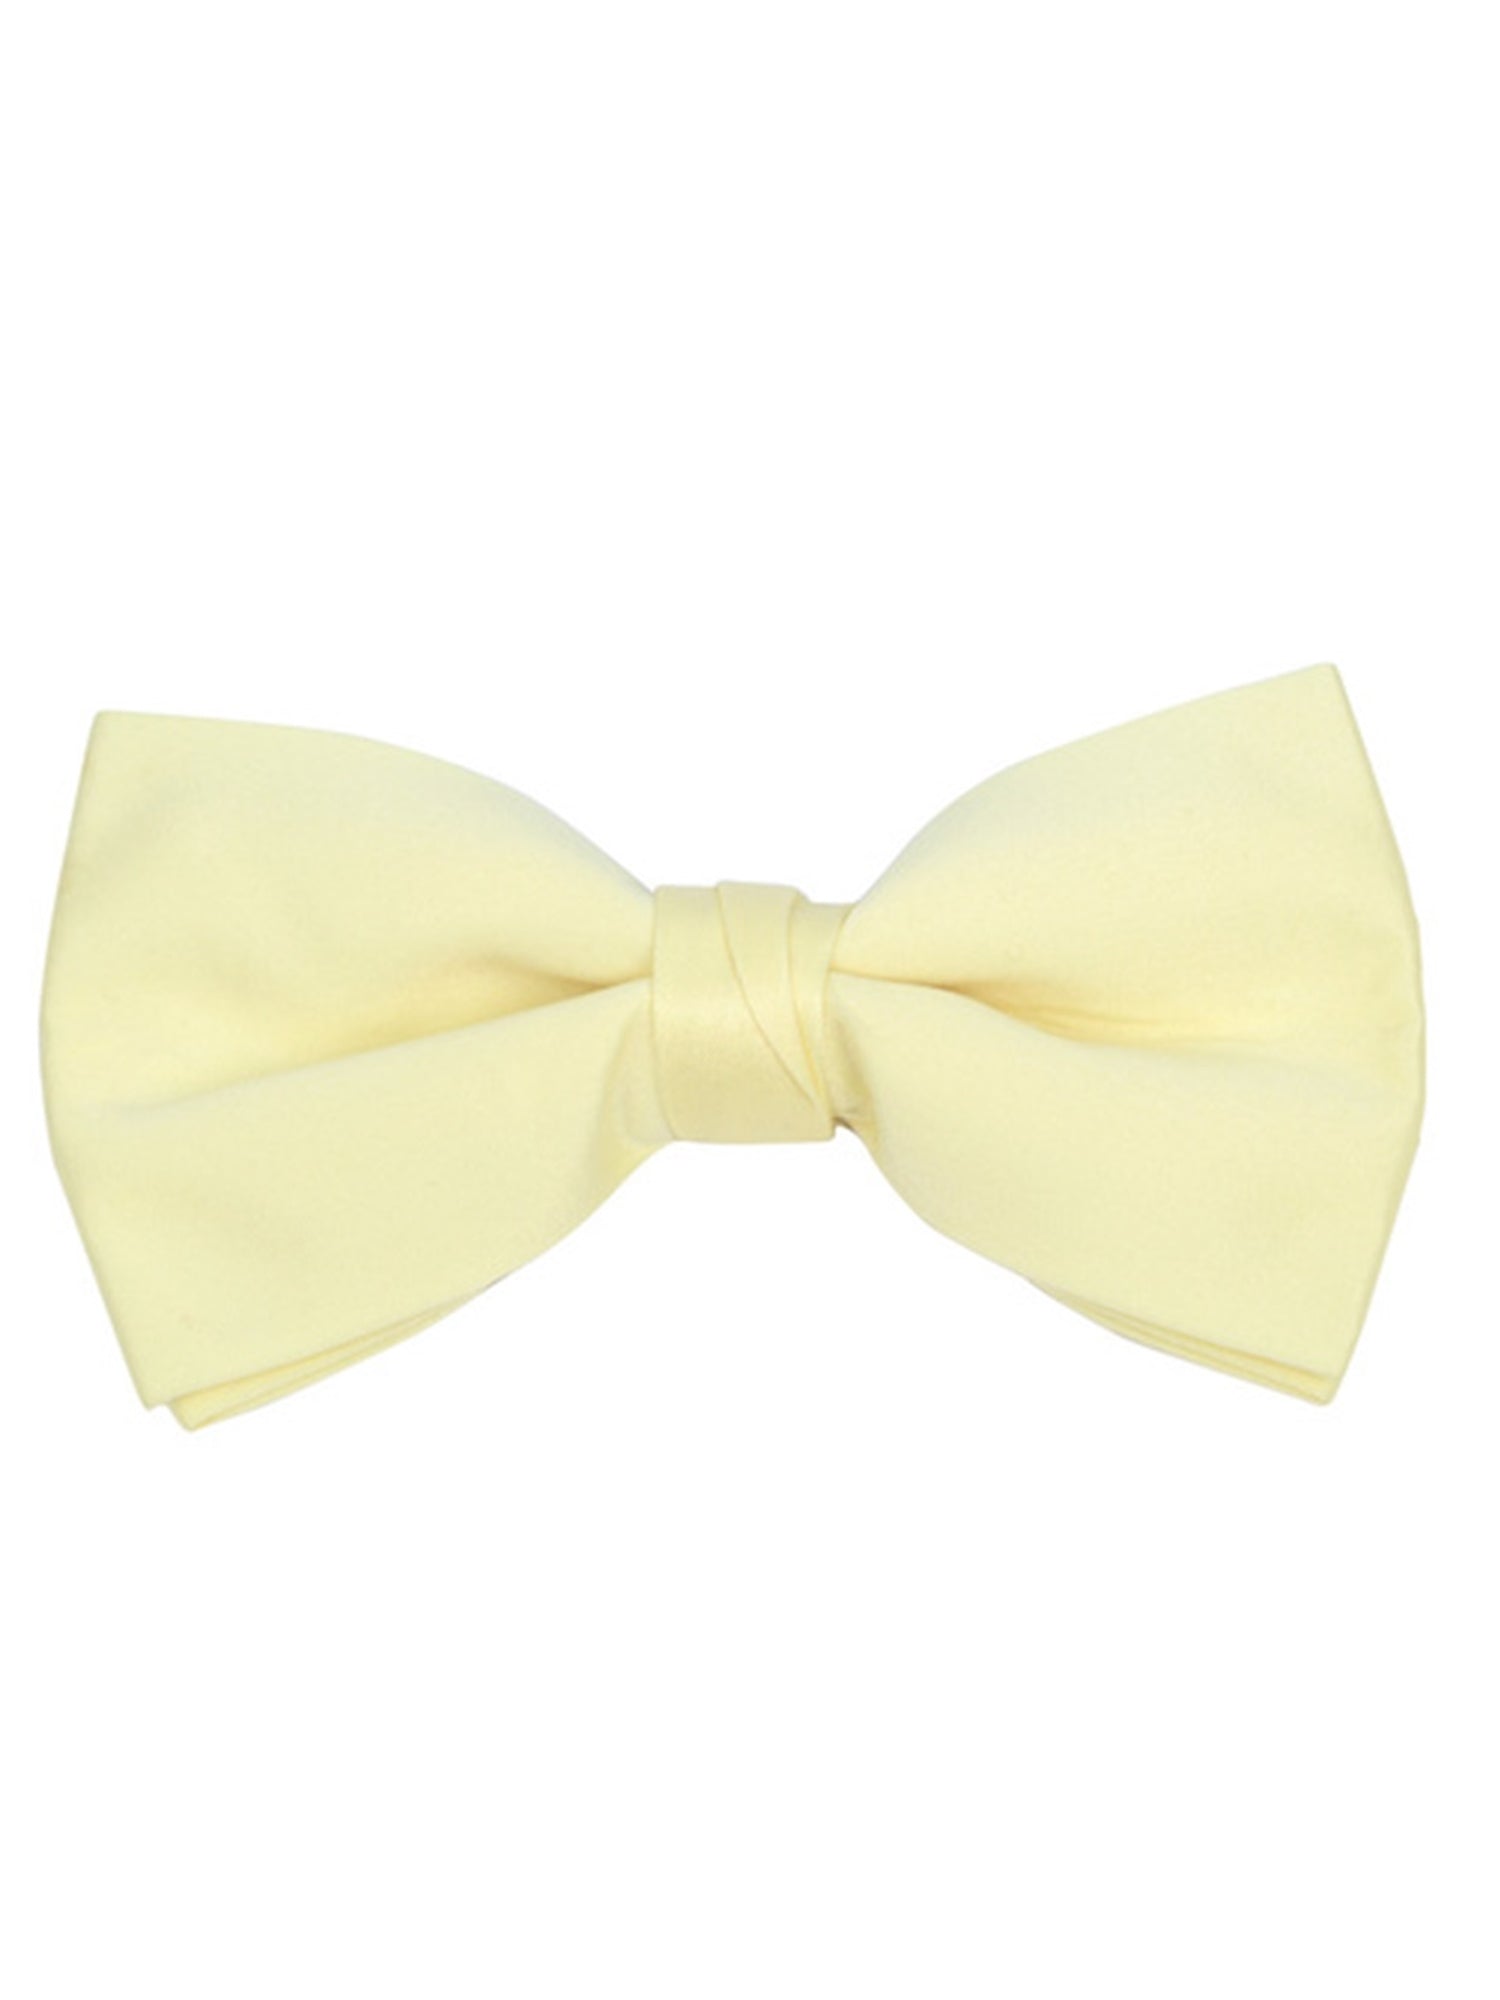 Young Boy's Pre-tied Adjustable Length Bow Tie - Formal Tuxedo Solid Color Boy's Solid Color Bow Tie TheDapperTie Light Yellow One Size 